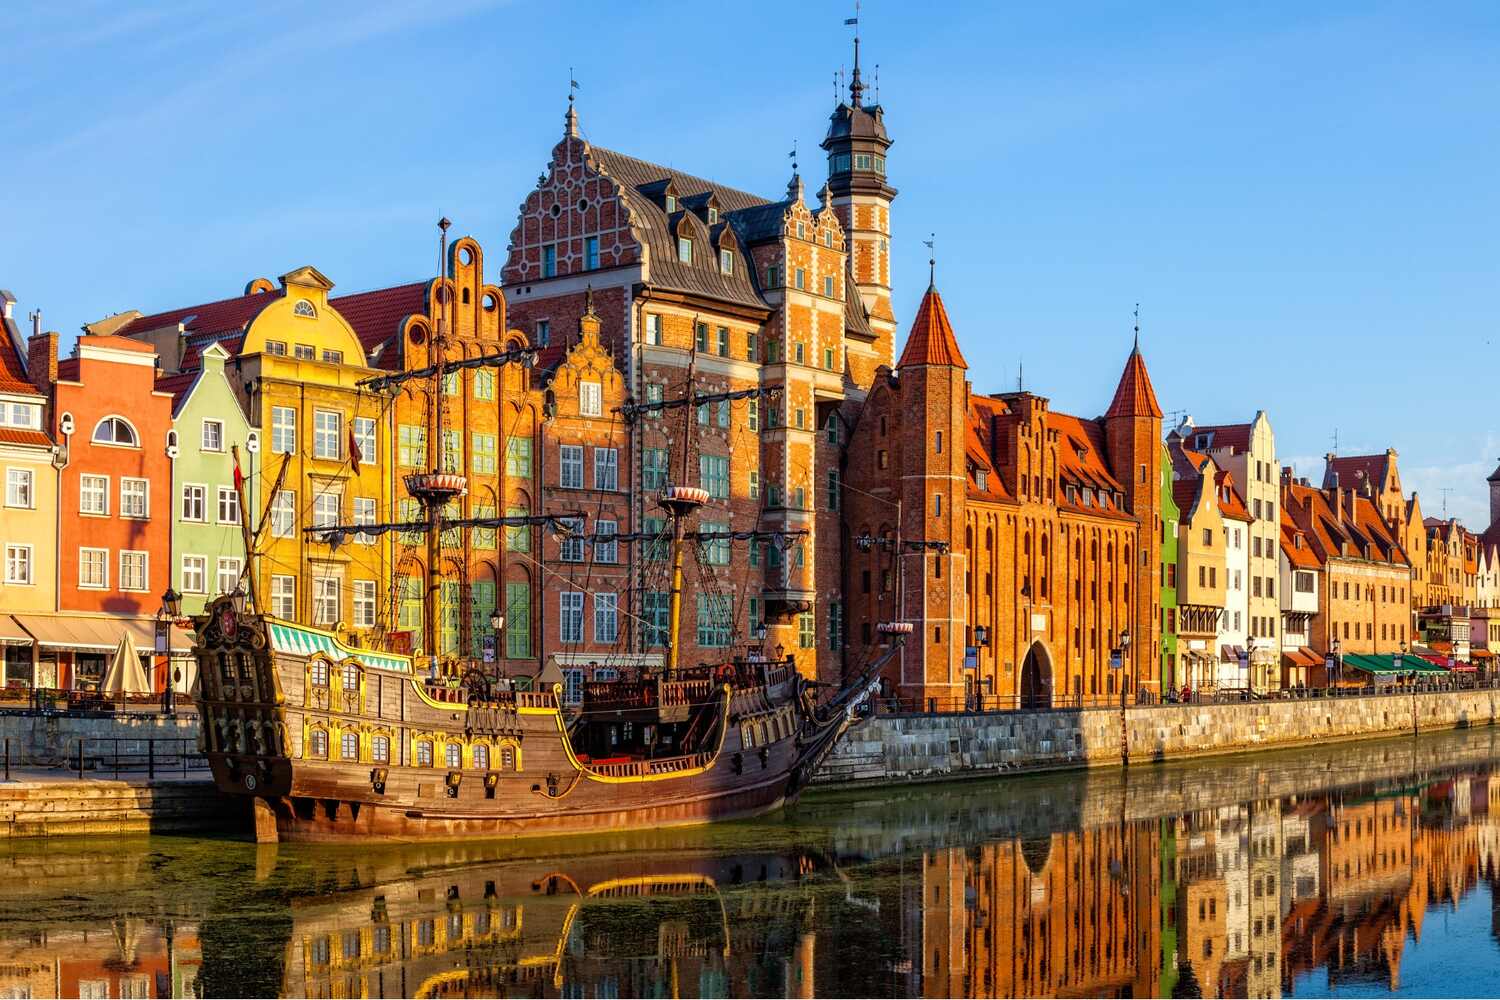 15-Unique-Things-to-Do-in-Poland-2024-Travel-Guide, Ornate, colorful buildings reflecting on the calm waters of a canal in a historic European city on a sunny day.